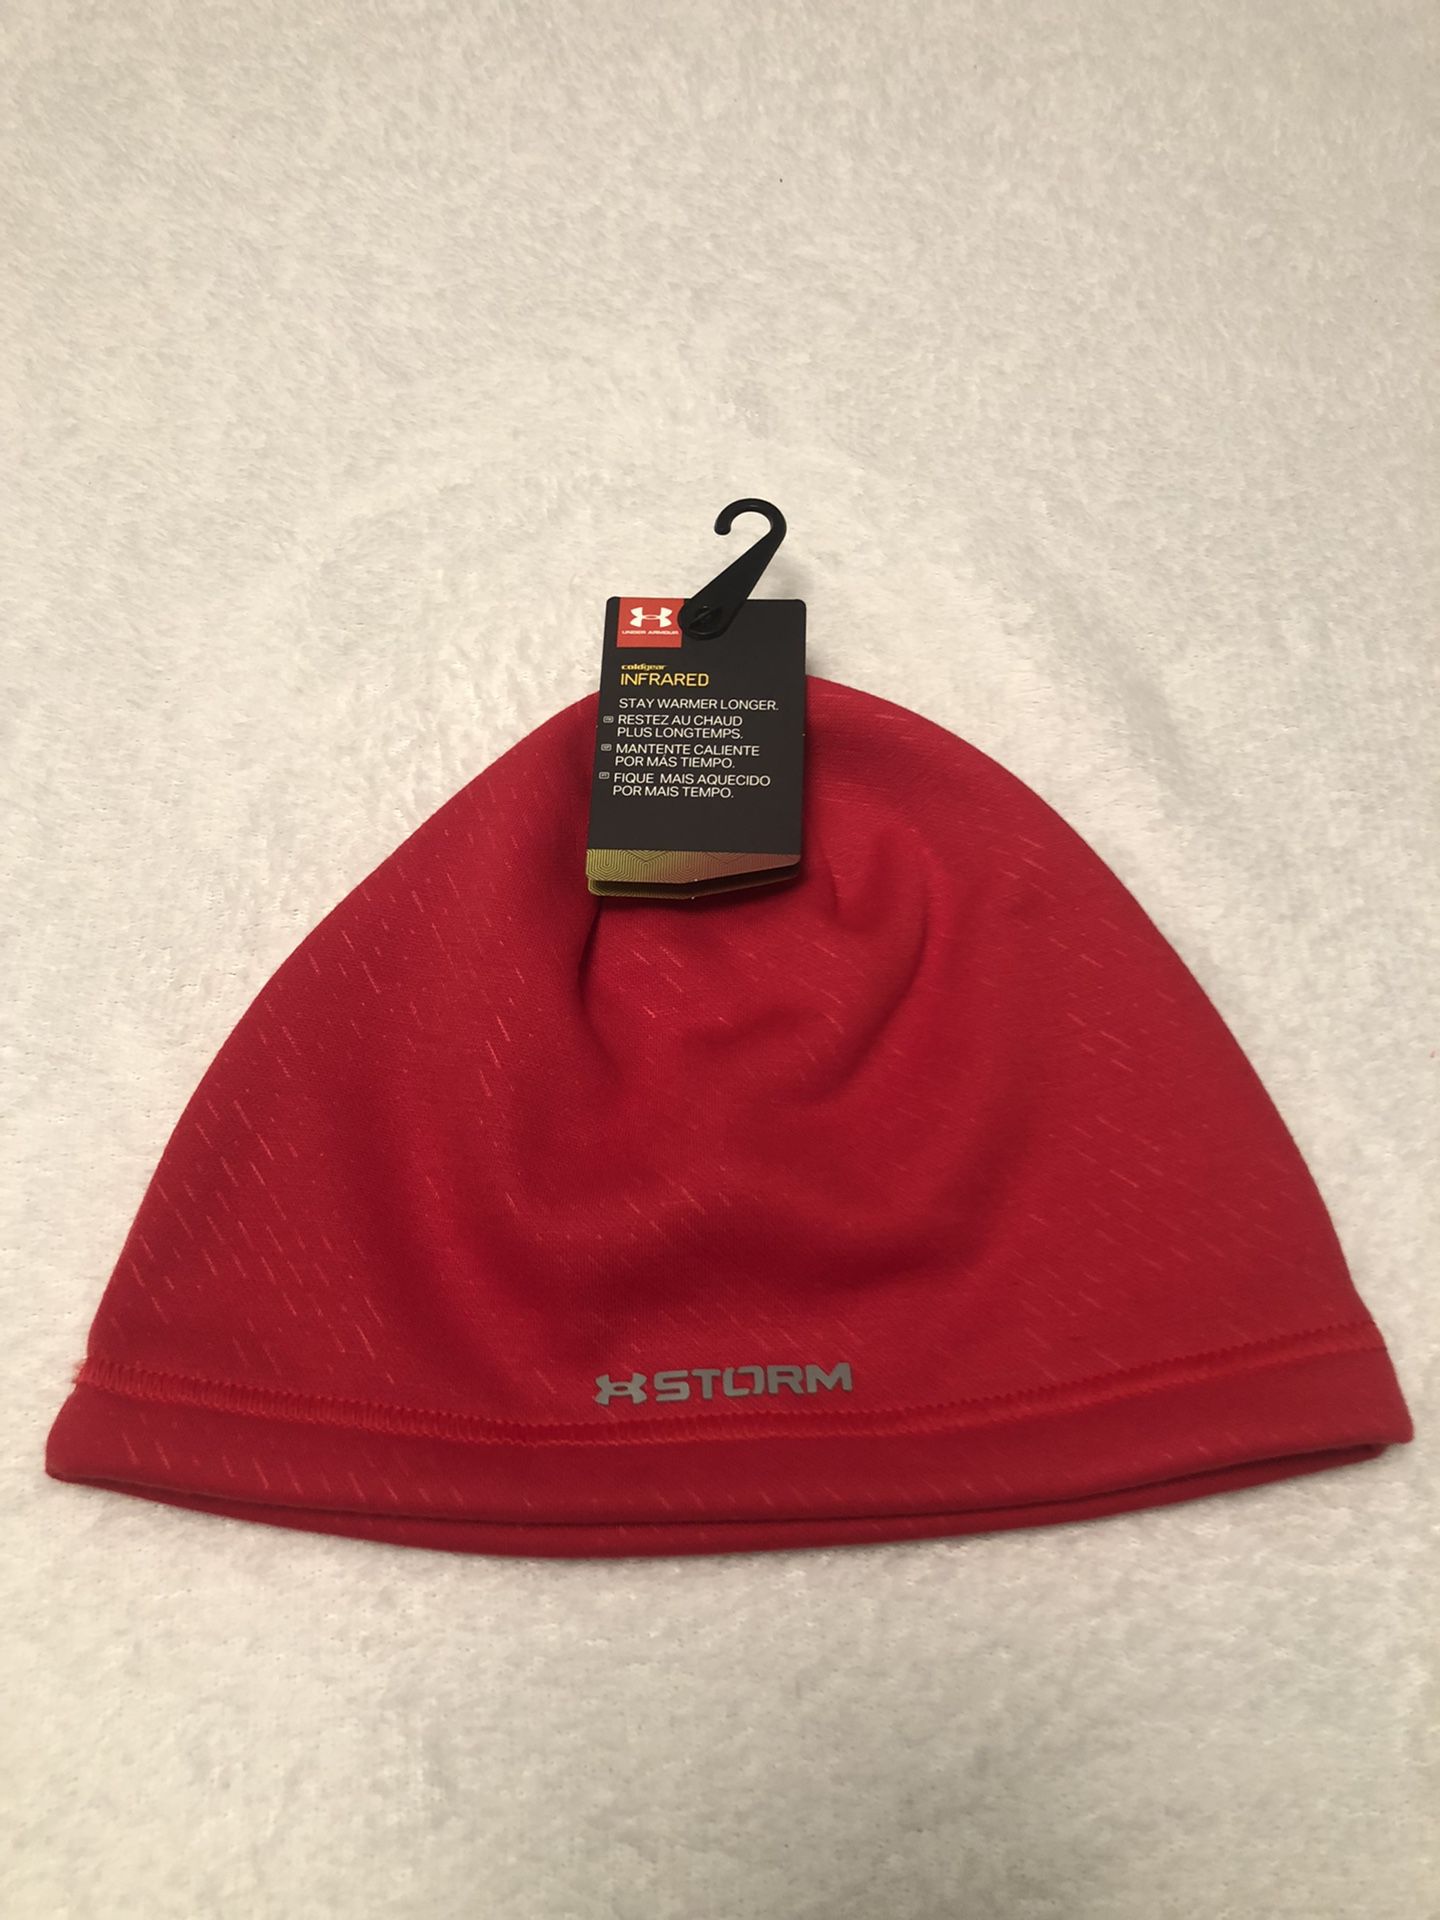 NEW Under Armour Men’s Cold Gear Infrared Storm RED Beanie Hat Running